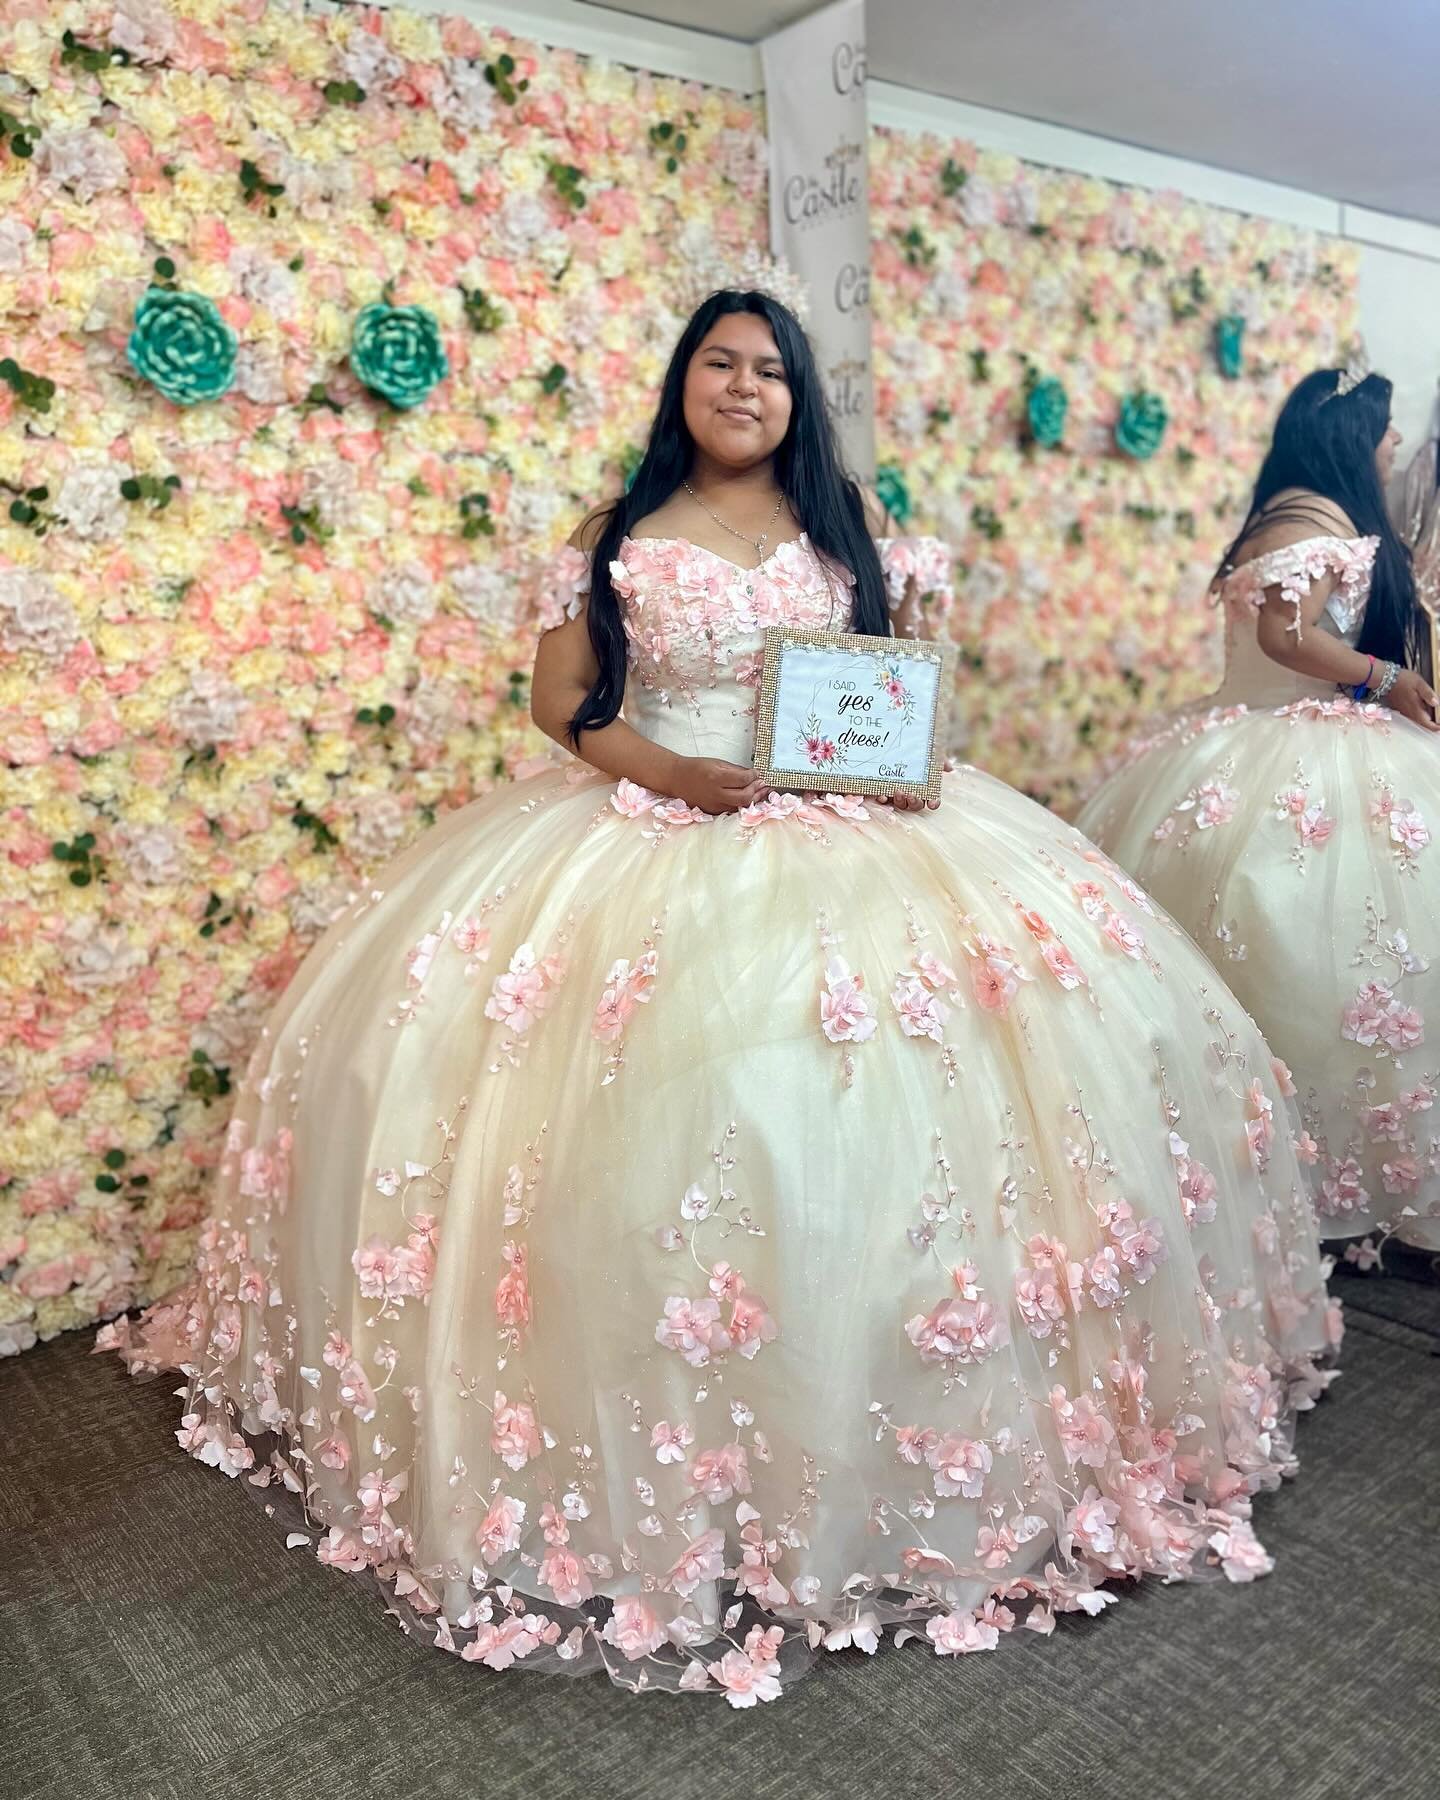 She said yes to her dress! ✨🩷✨
✨
✨ ✨
✨✨
✨✨✨
✨✨✨✨
✨✨✨✨✨
✨✨✨✨
✨✨✨
✨✨
✨
#mycastleboutique #pearland #pearlandtx #quincea&ntilde;era #quinceanera #quince #ballgown #sweet15 #dresses #partydress #vestidosdequince #xv #prom #dress #quinceaneradress #quinc